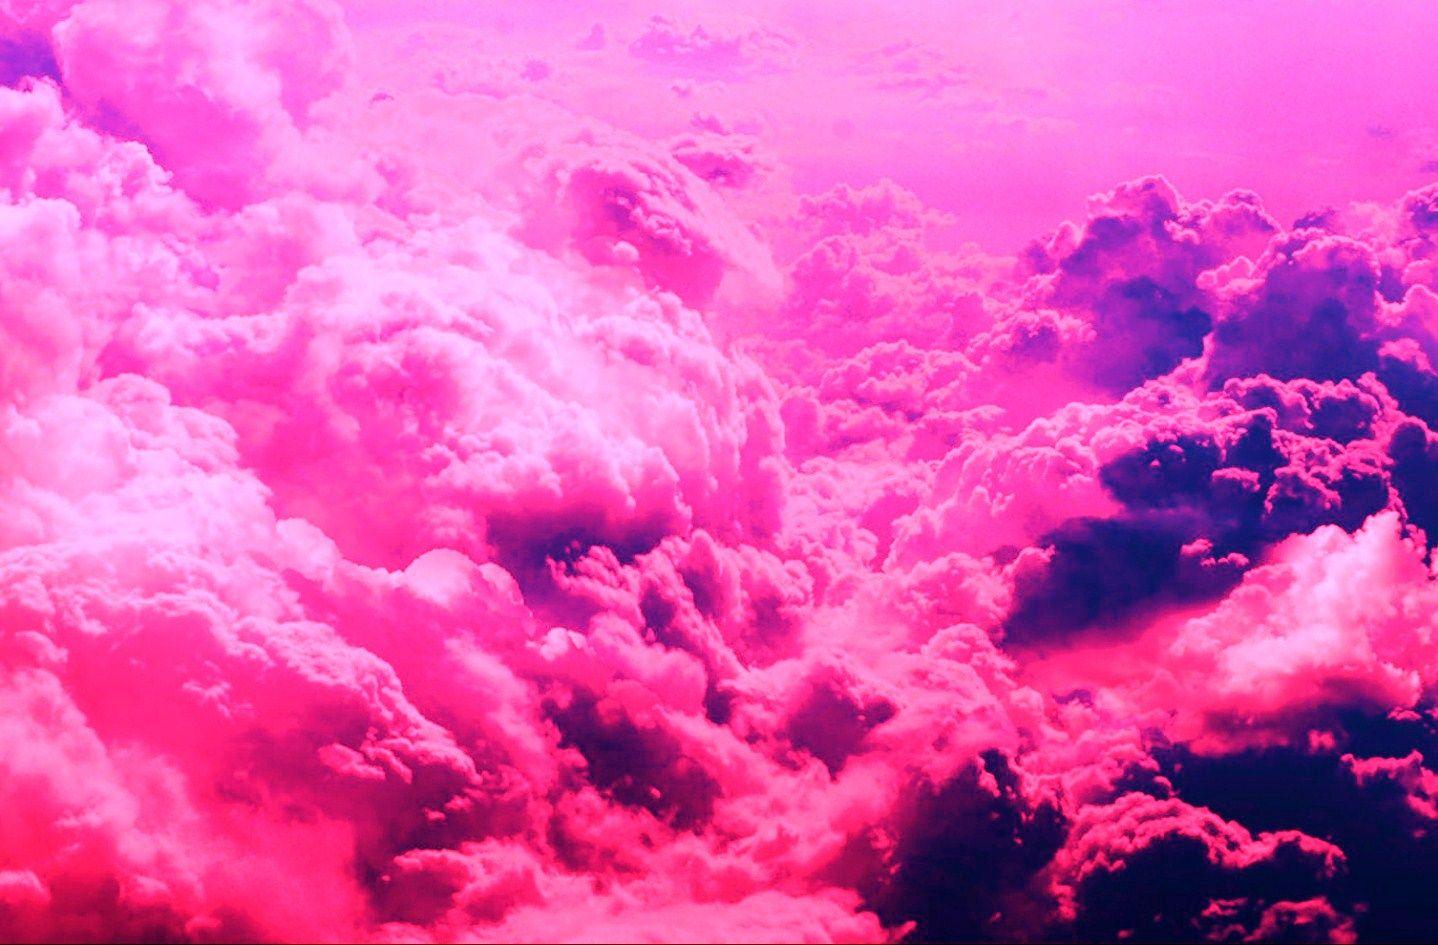 Kate Abstract Pink Clouds Dream Backdrop for Photography